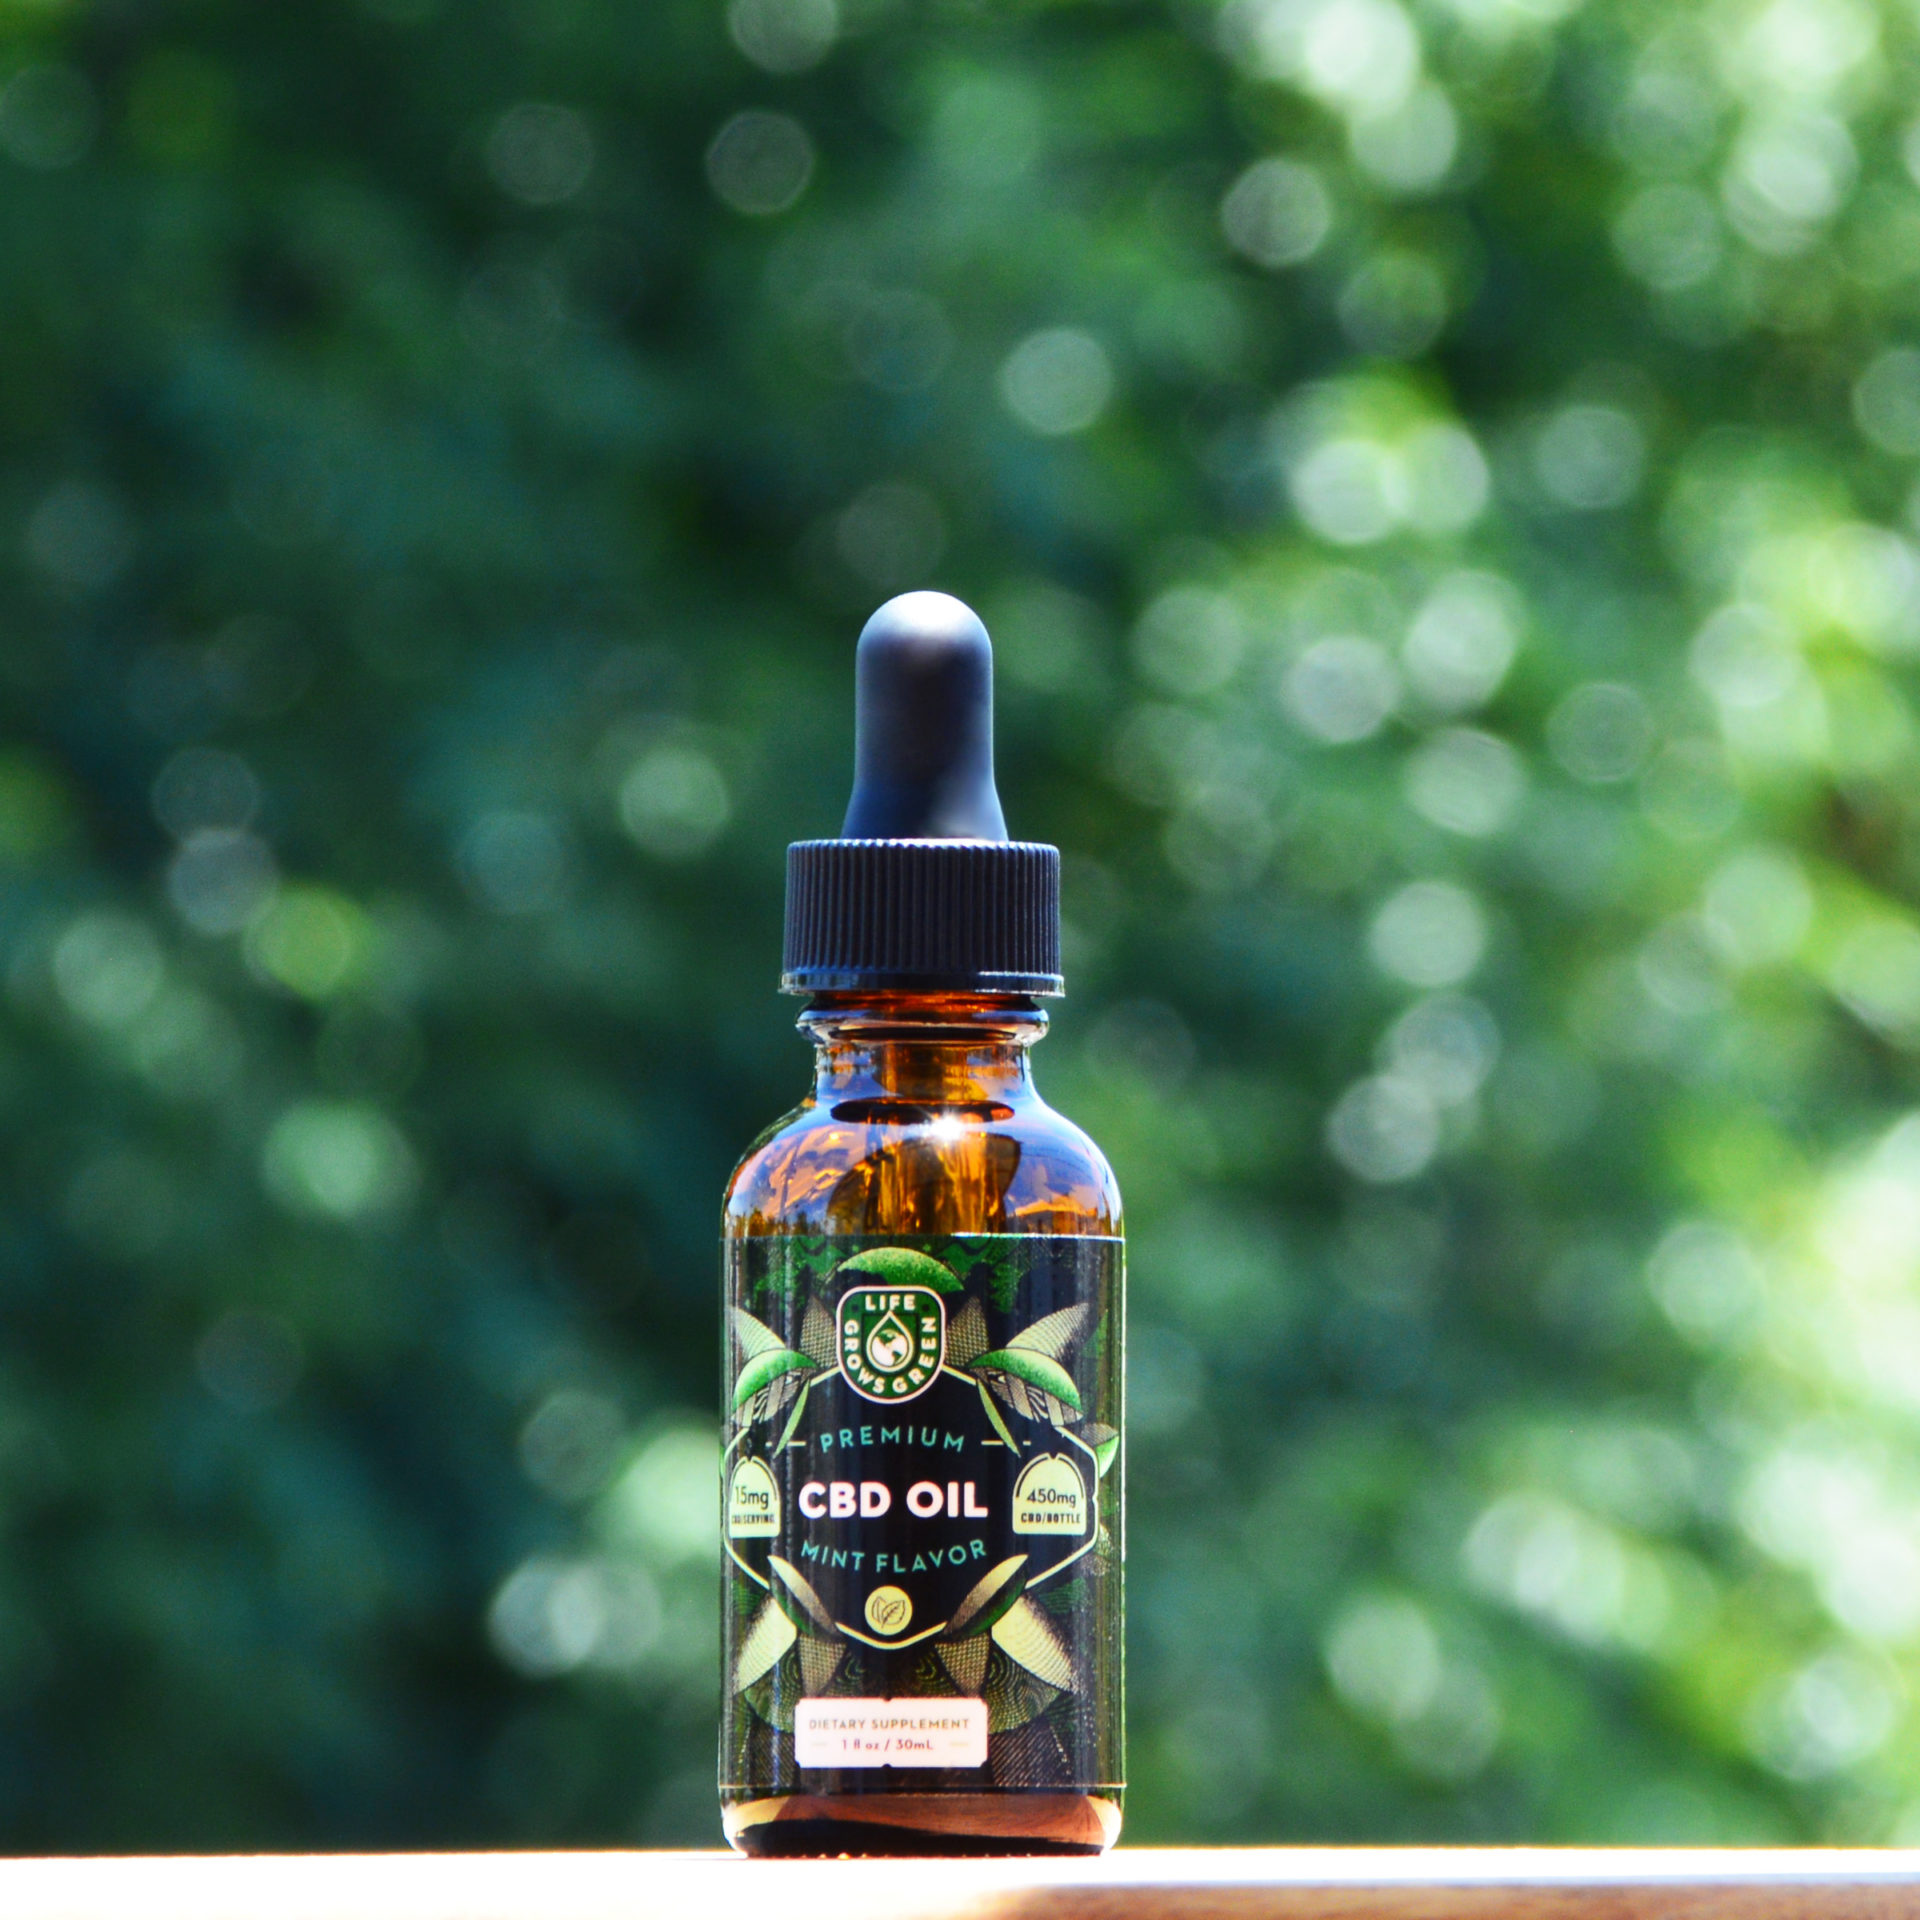 A bottle of mint flavored Life Grows Green CBD oil.